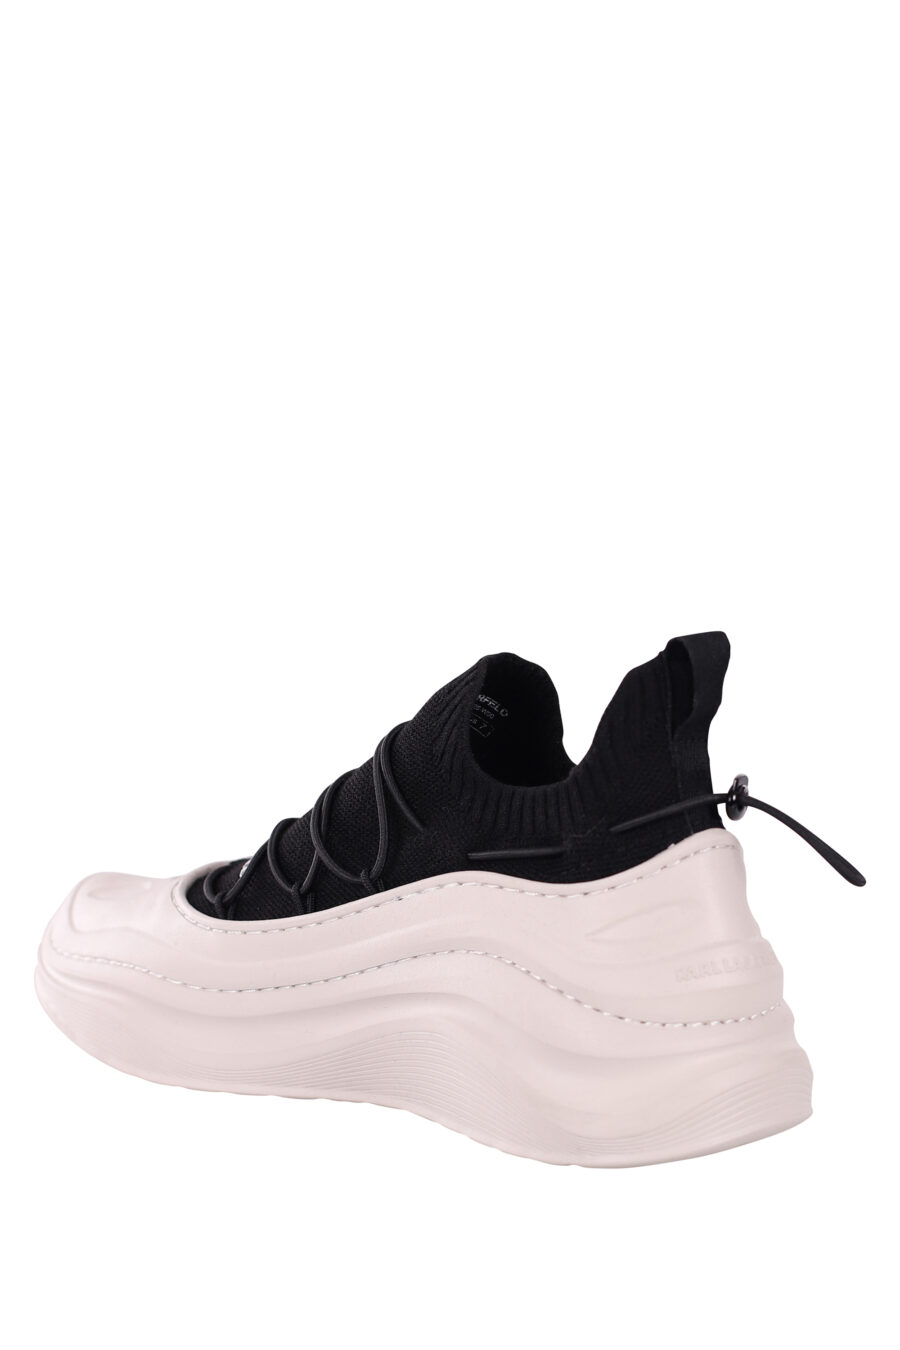 Black and white bicolour trainers with wavy white sole - IMG 5877